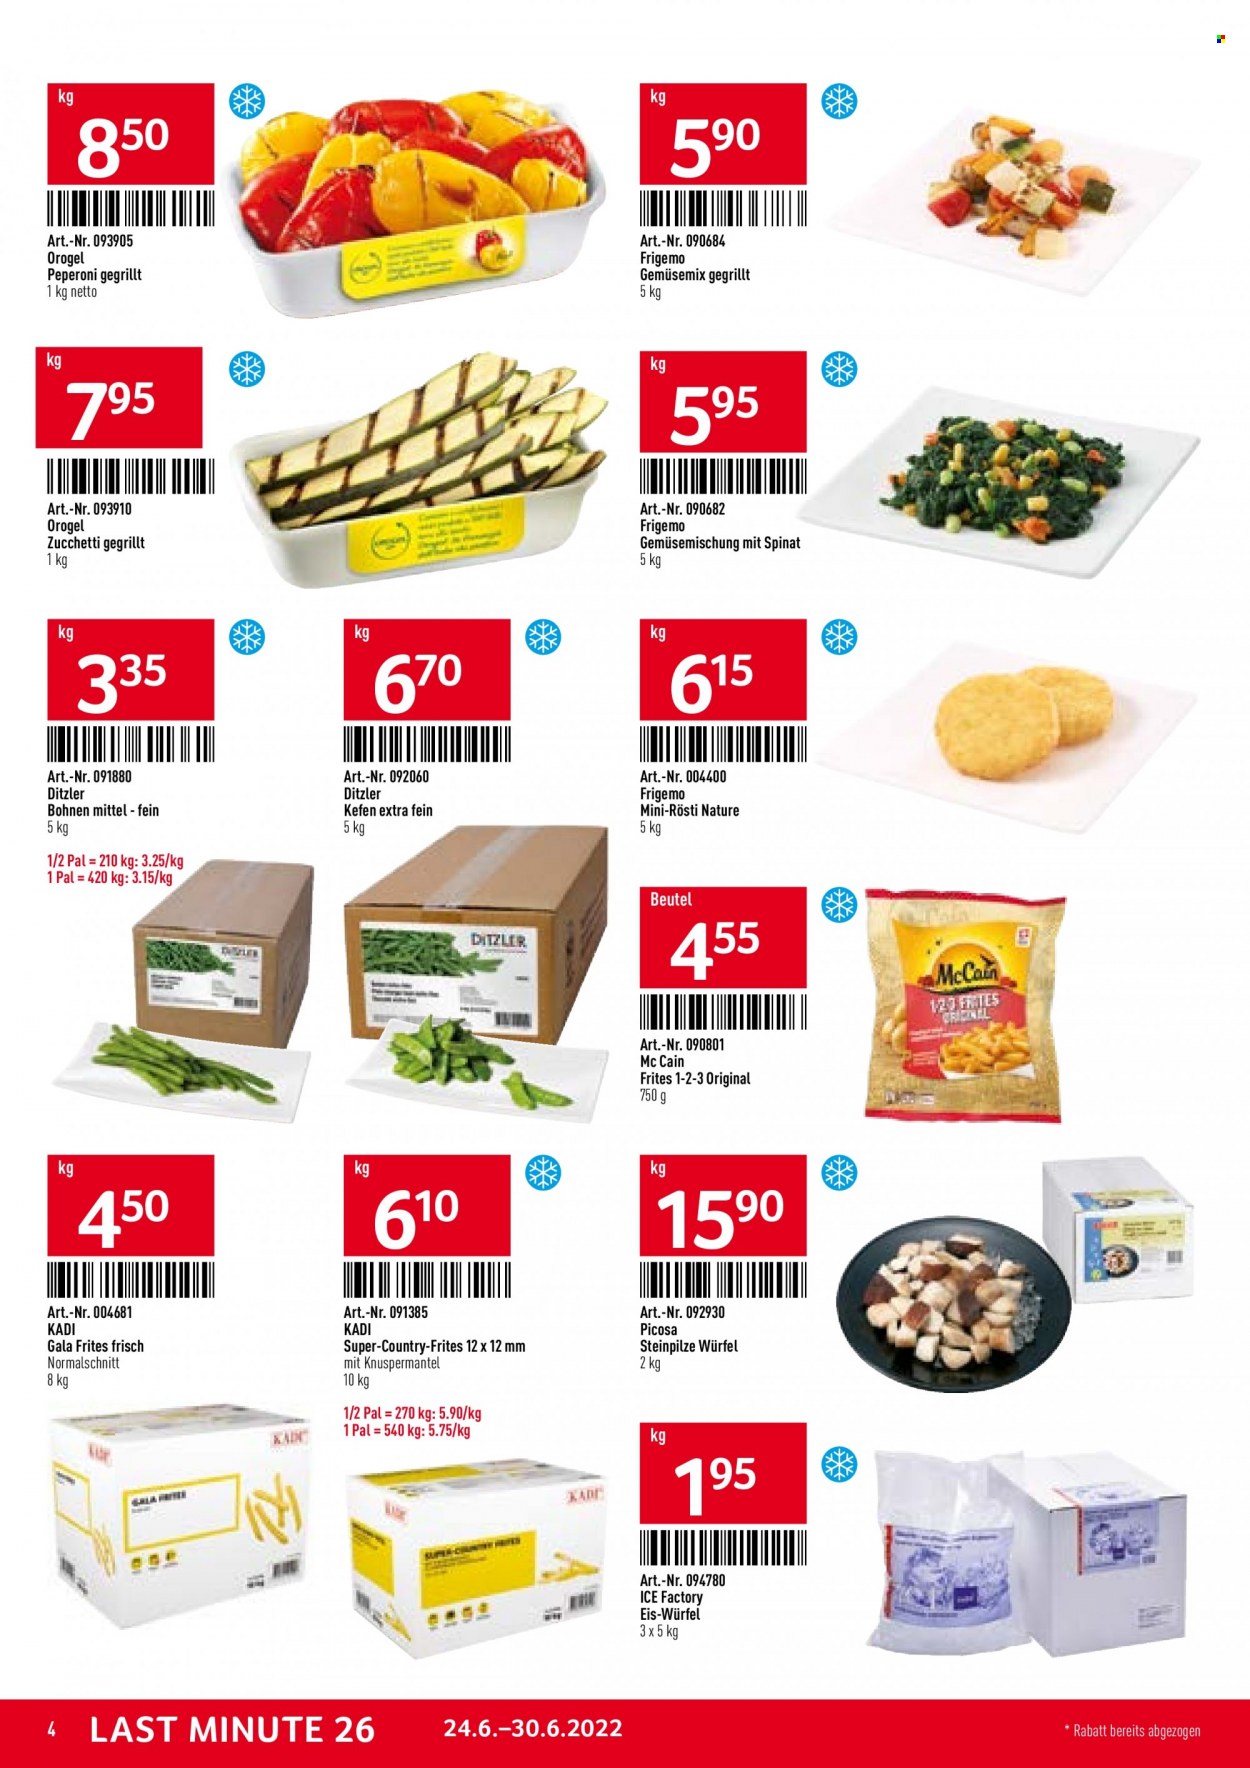 Catalogue TransGourmet - 24.6.2022 - 30.6.2022. Page 4.